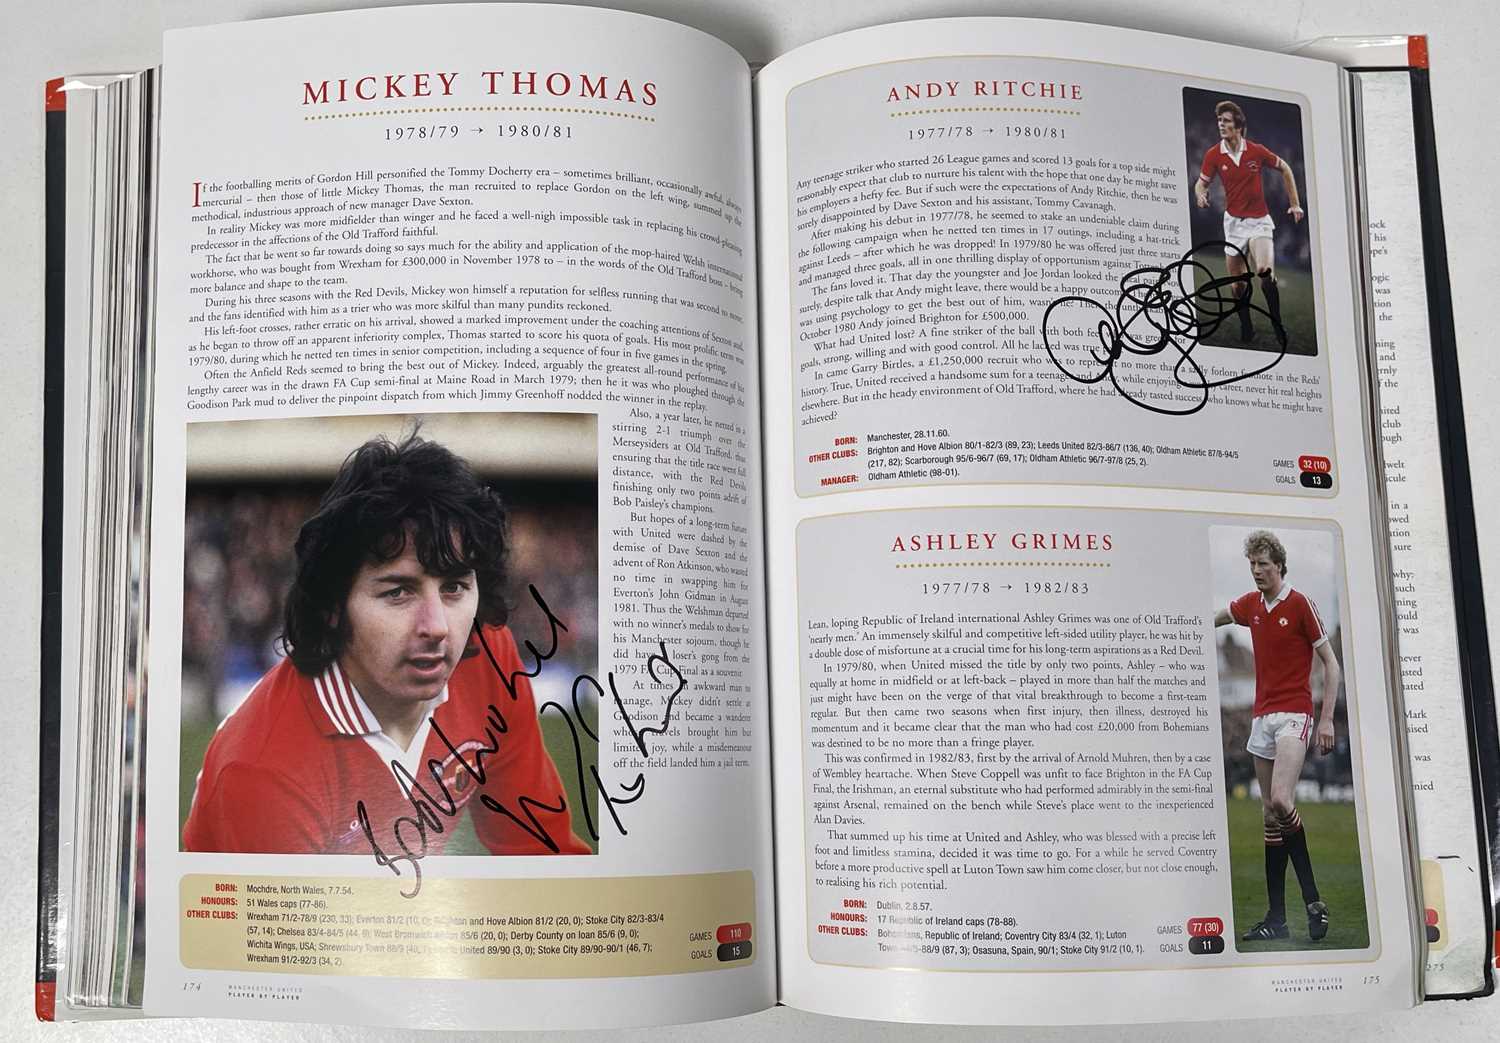 FOOTBALL MEMORABILIA - MANCHESTER UNITED MULTI SIGNED 'PLAYER BY PLAYER' BOOK. - Image 24 of 50